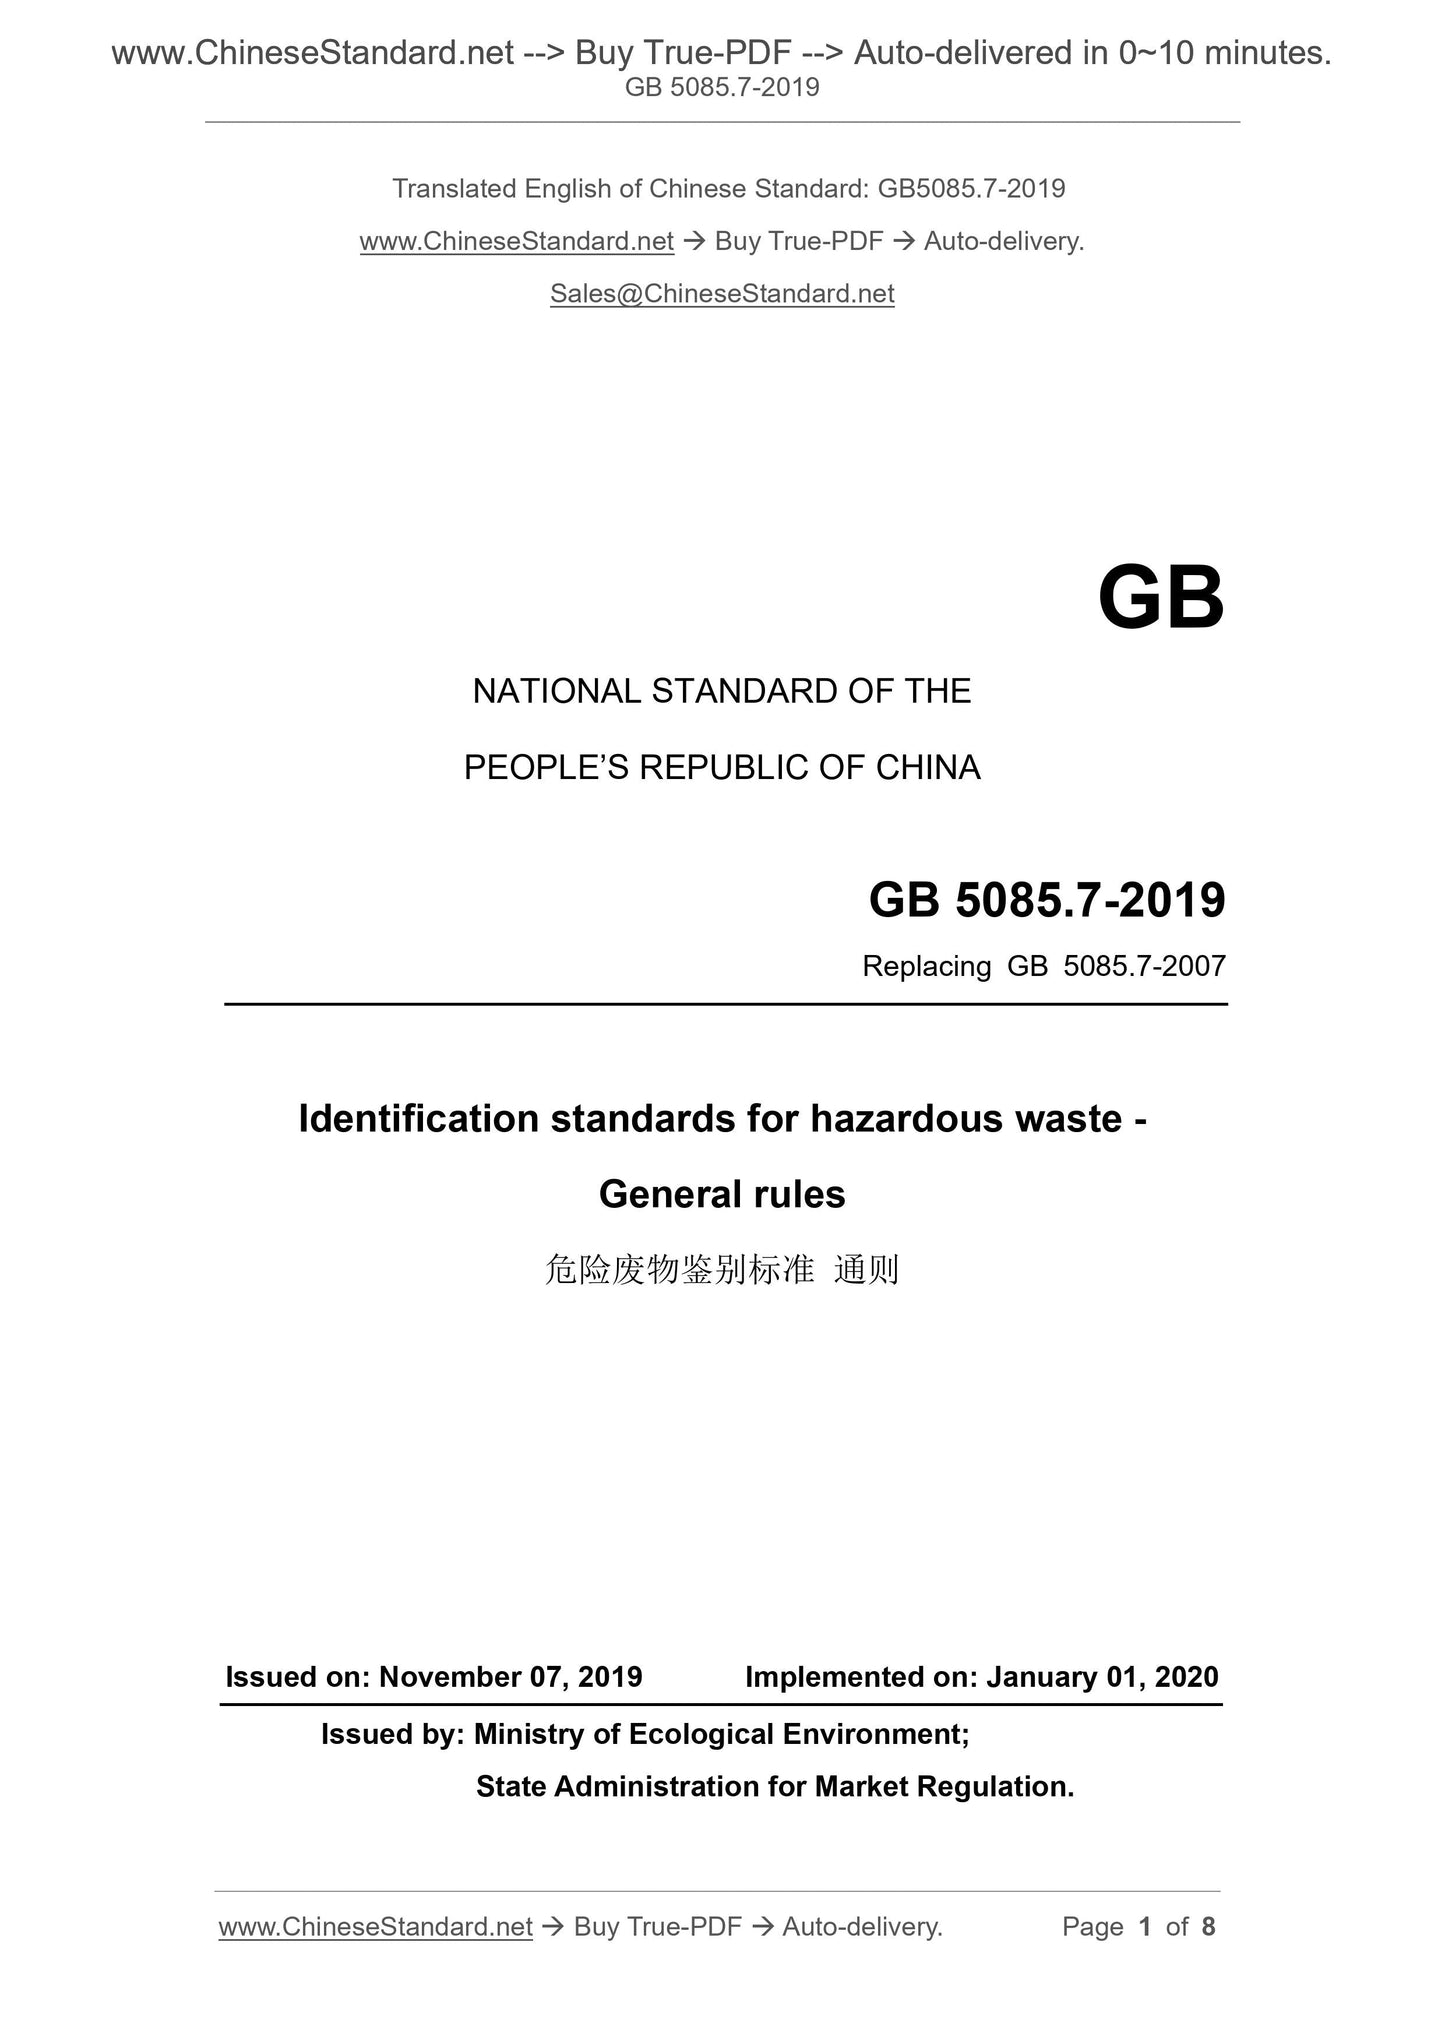 GB 5085.7-2019 Page 1